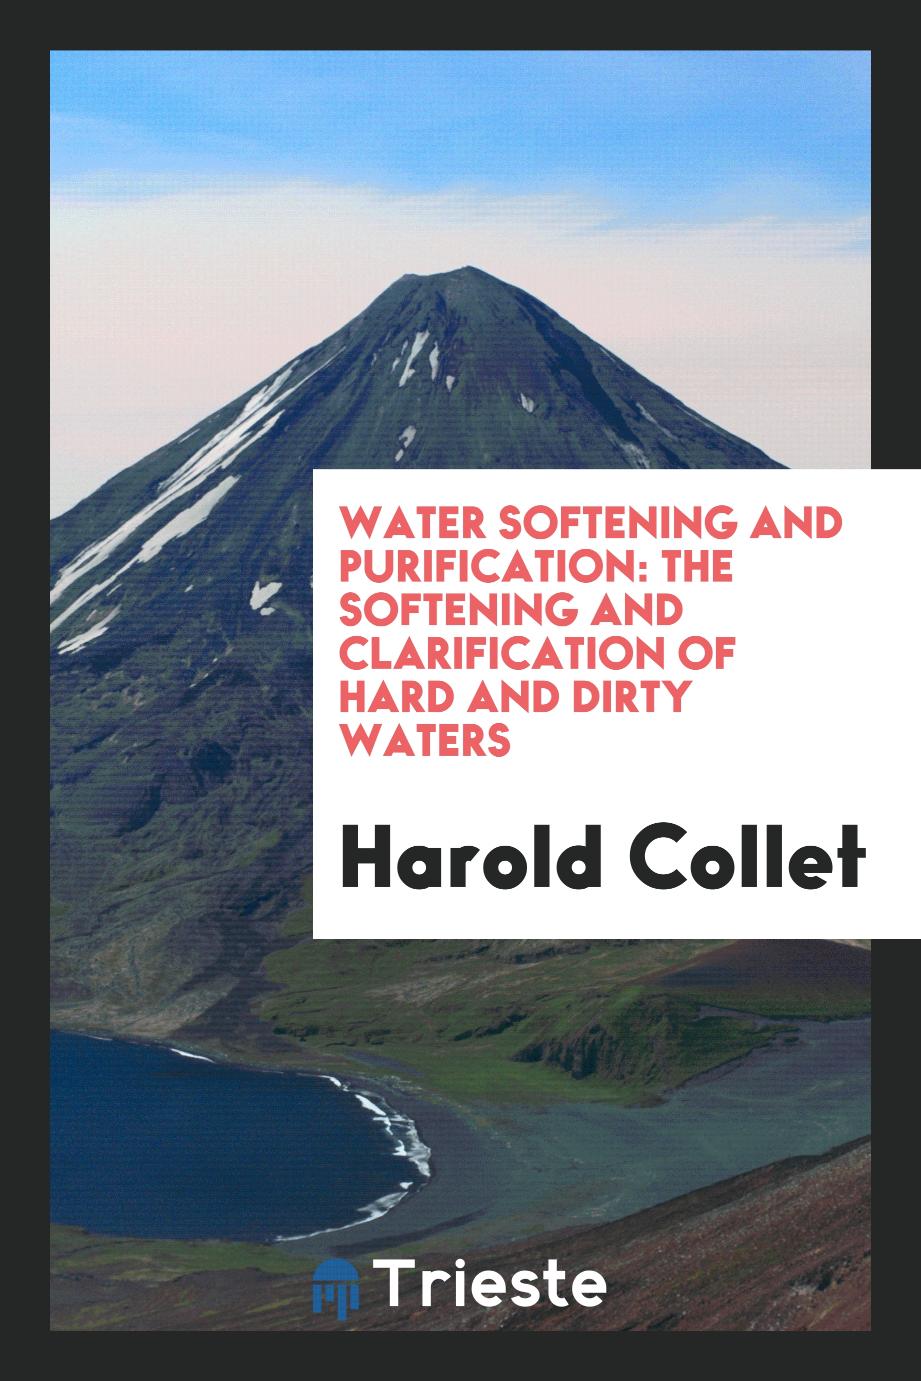 Water Softening and Purification: The Softening and Clarification of Hard and Dirty Waters